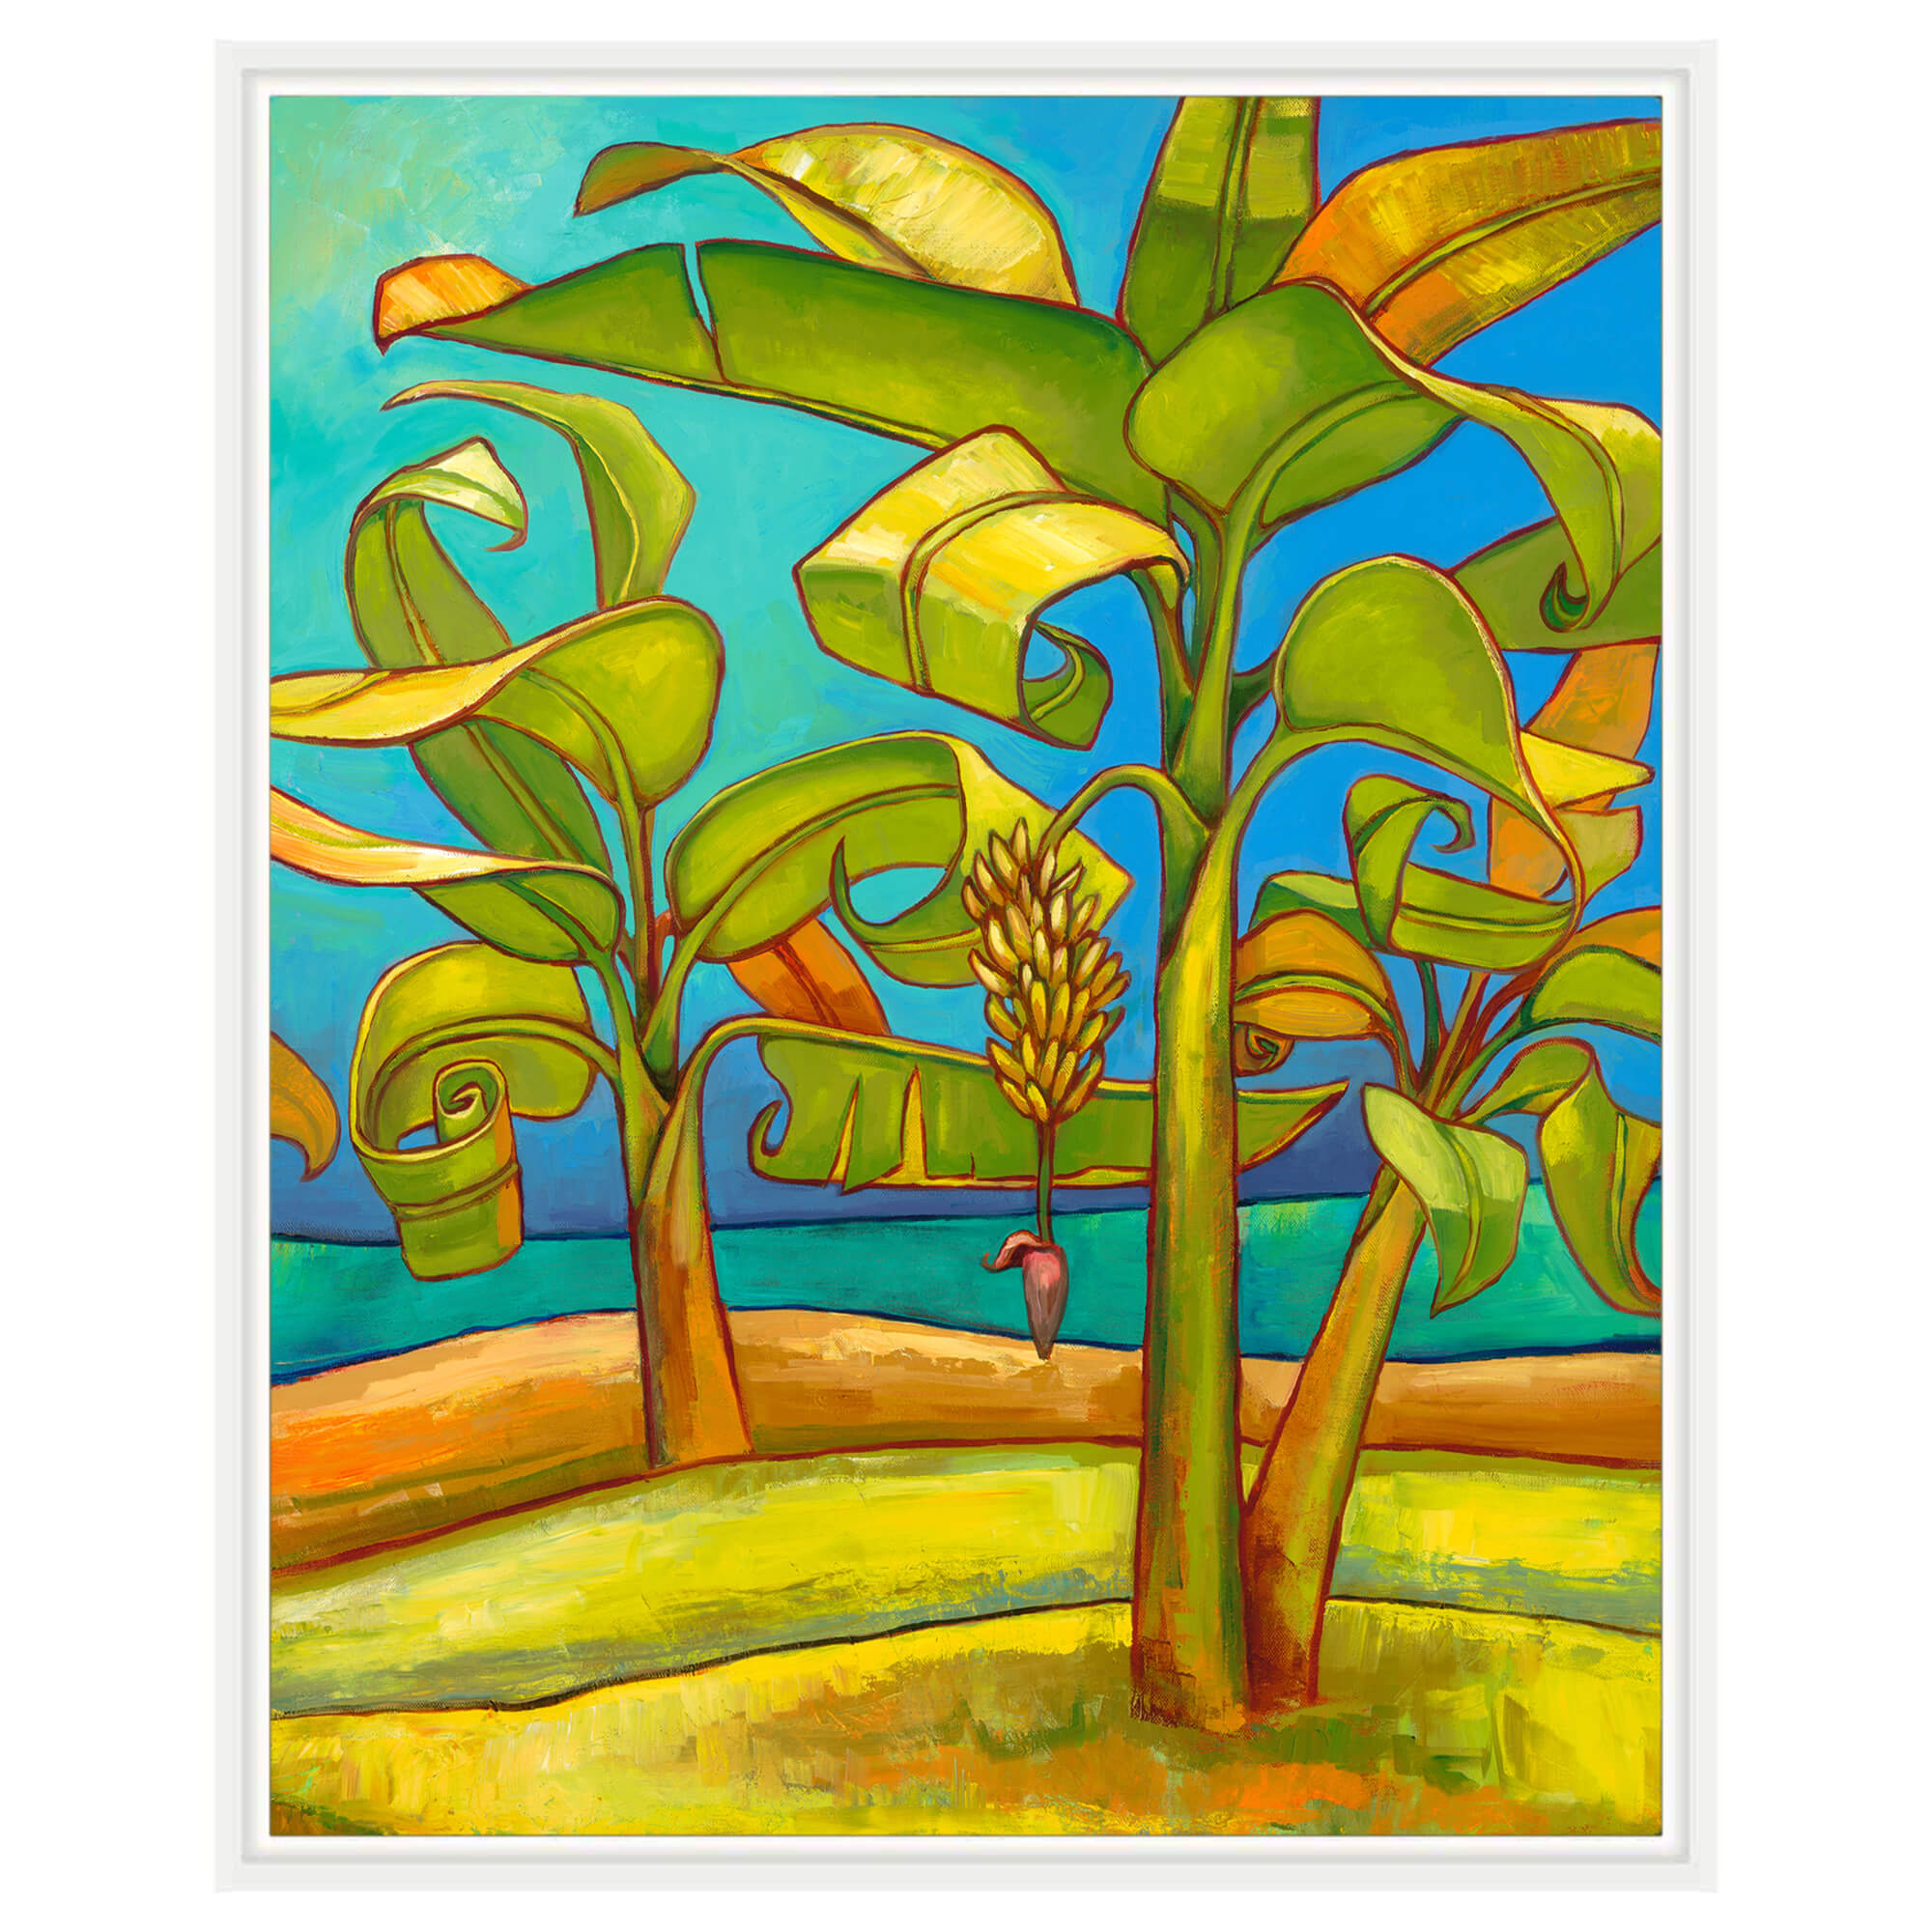 Banana trees under a clear blue sky by Hawaii artist Colin Redican